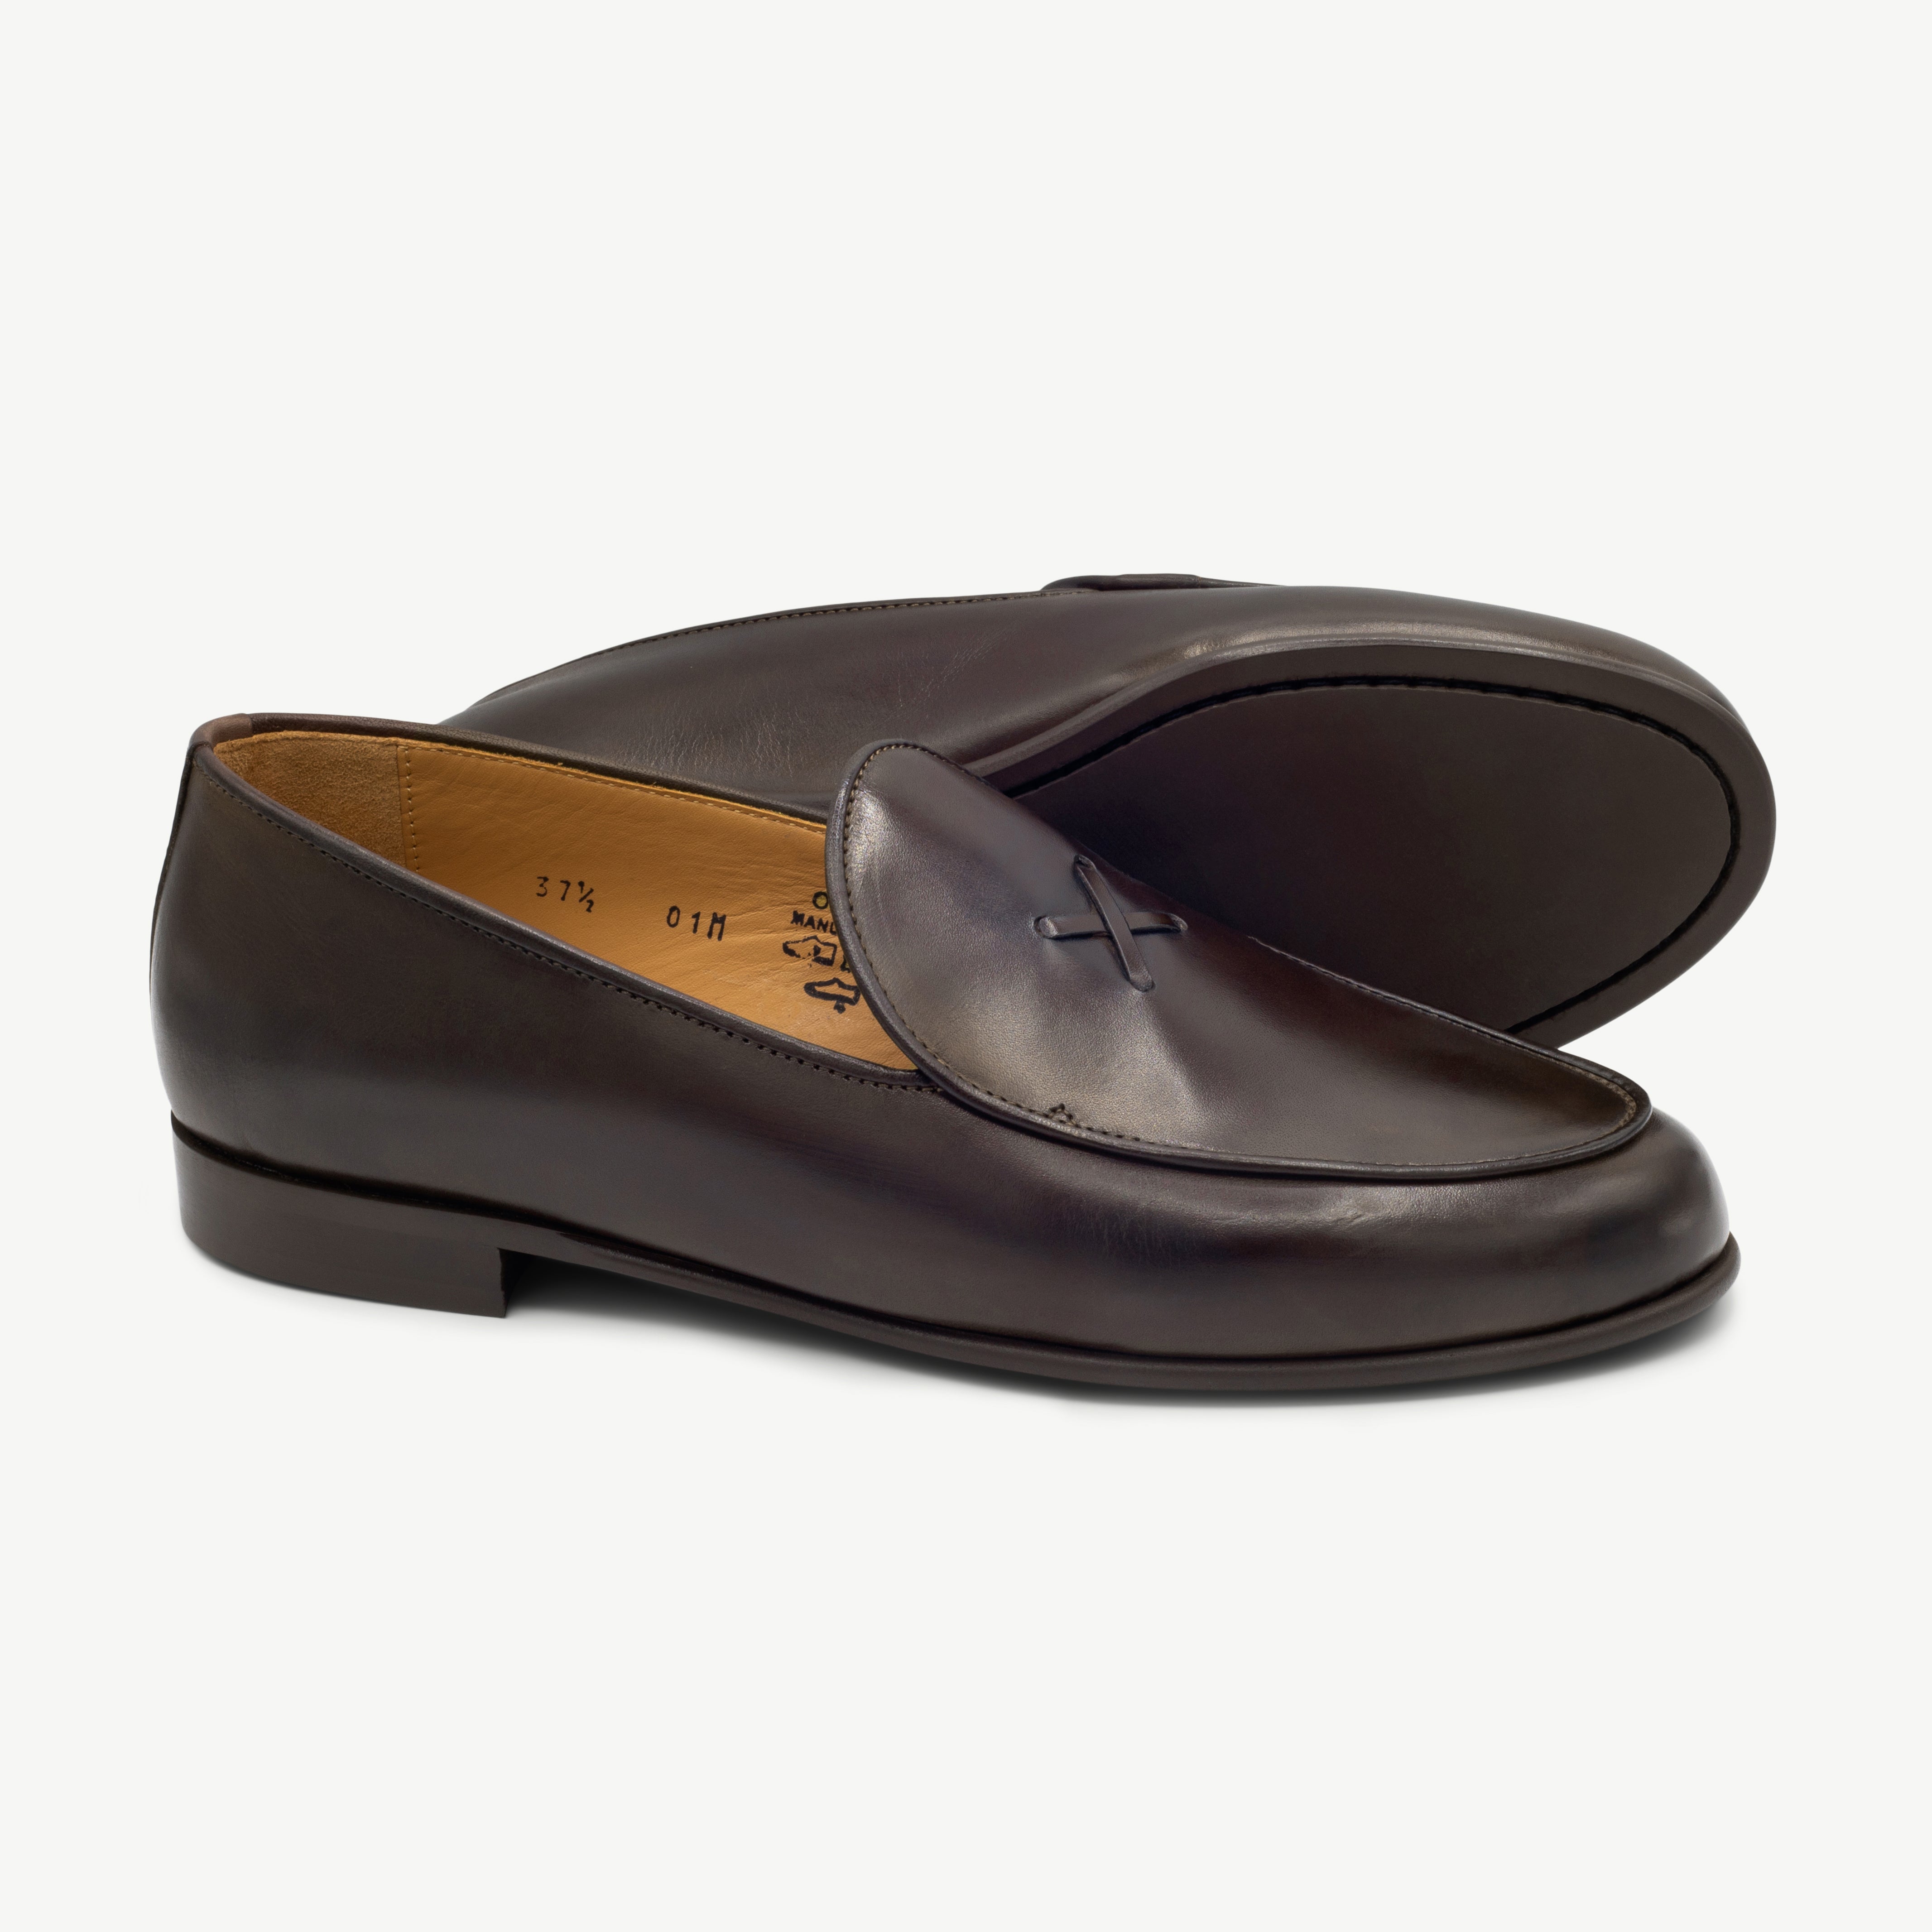 Women's Brown Leather Milano Loafer